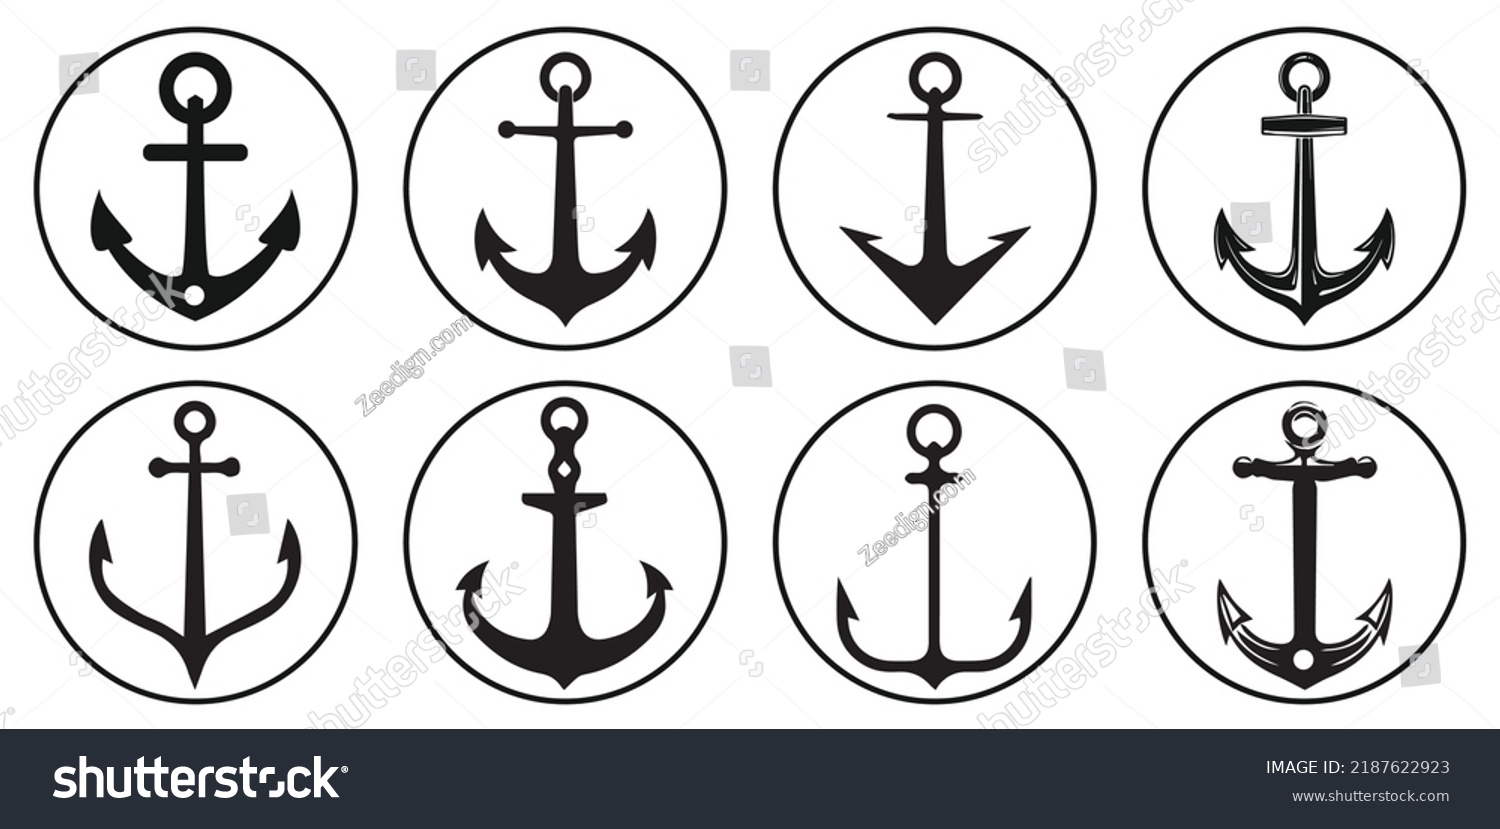 SVG of Set of black vector Anchor icons. Ship Anchors vector icon collection. Flat style Anchors logo in different shapes isolated on white background. svg